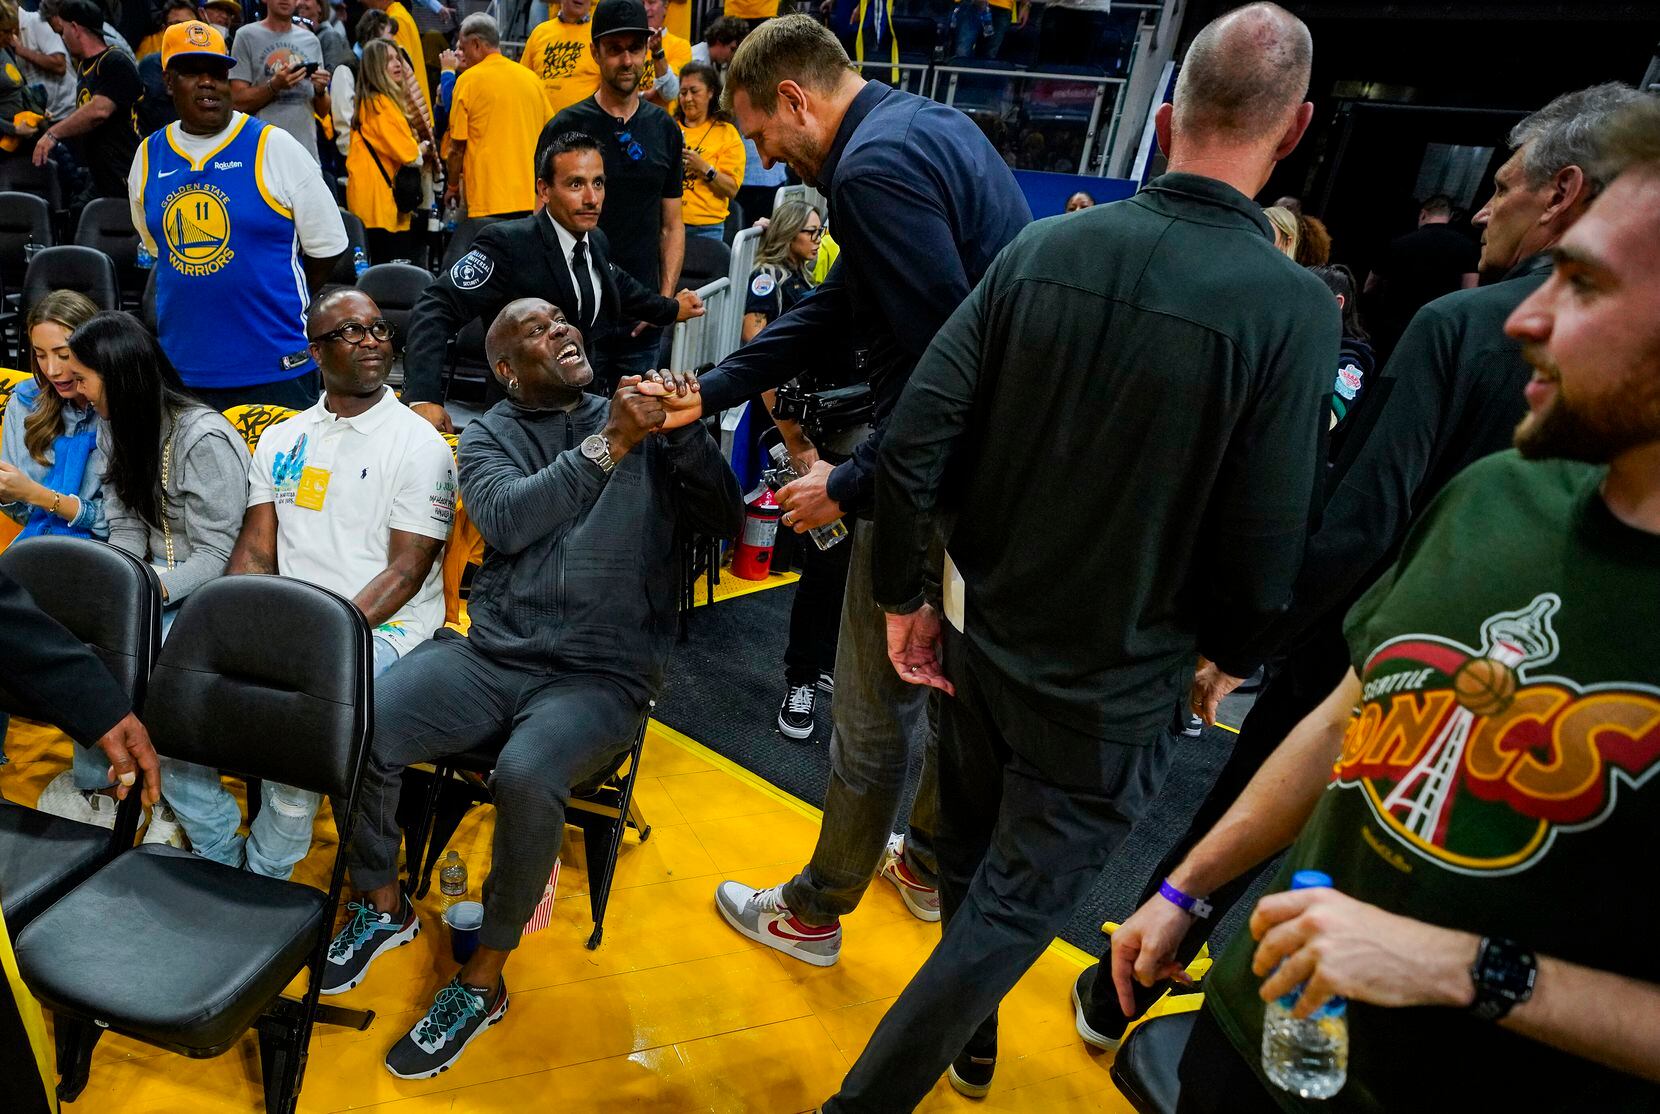 Dirk Nowitzki shakes hands with Gary Payton (seated) after the Golden State Warriors victory...